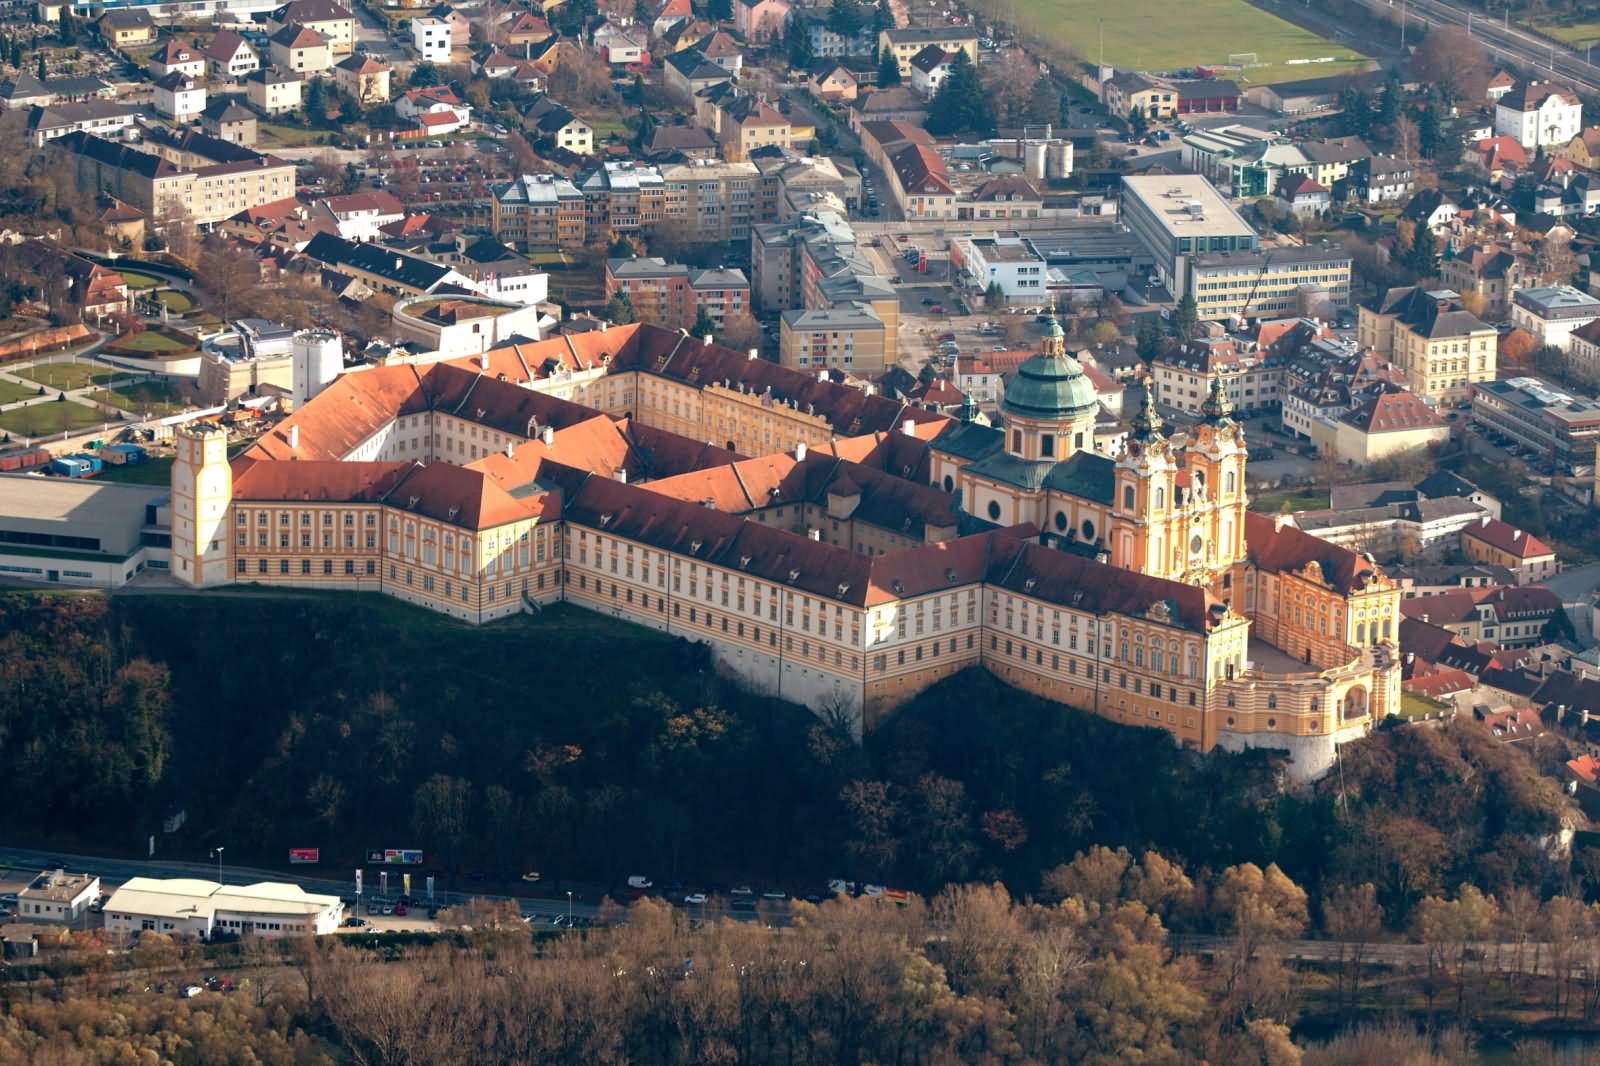 Amazing Aerial View Of The Melk Abbey